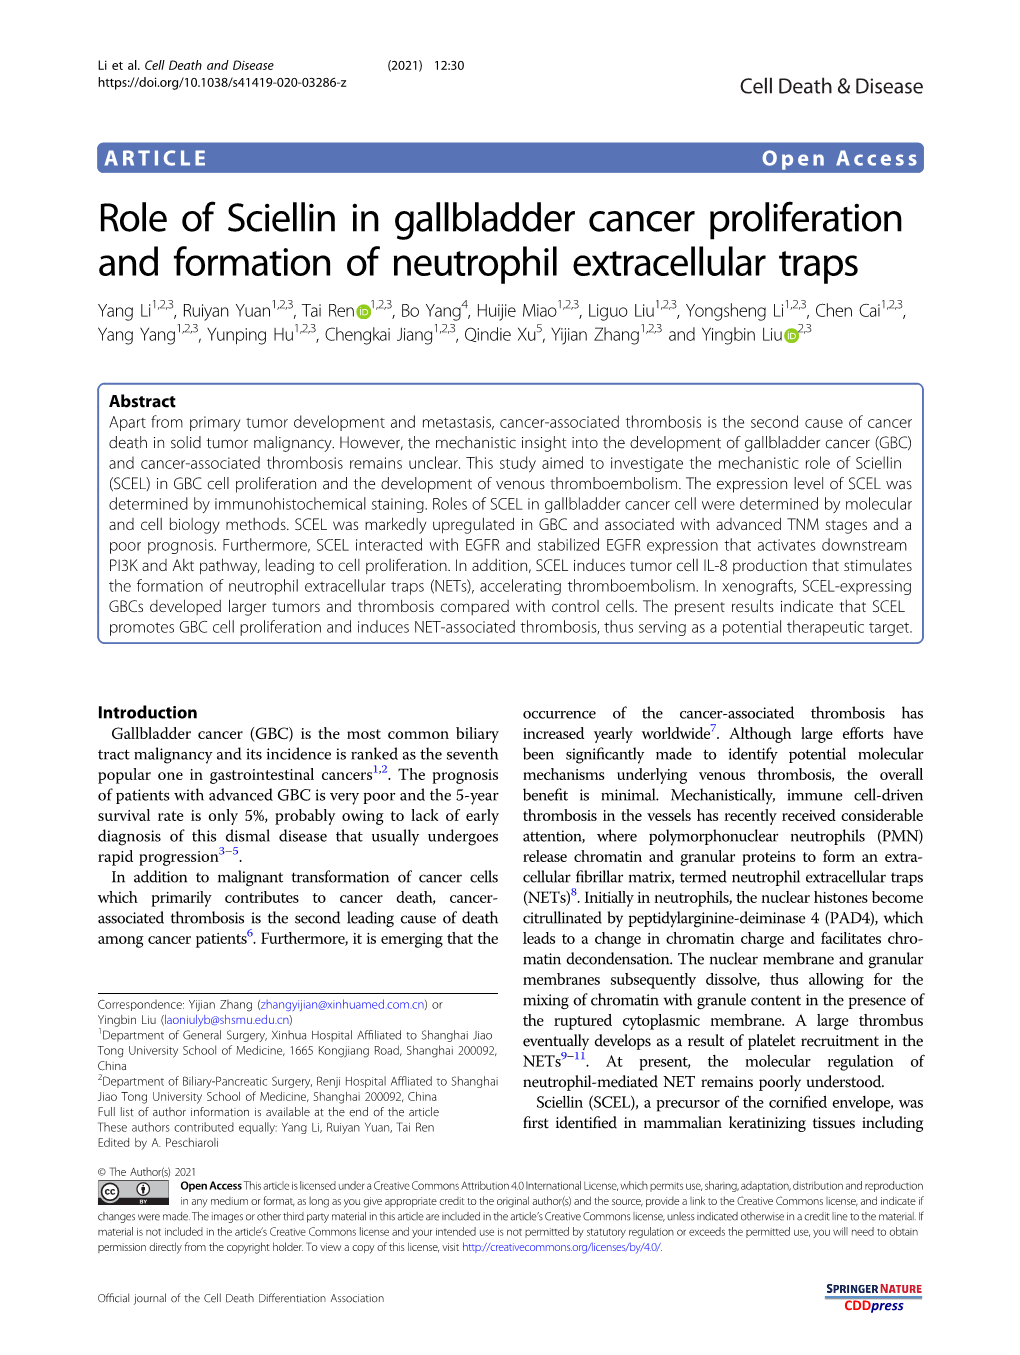 Role of Sciellin in Gallbladder Cancer Proliferation and Formation Of